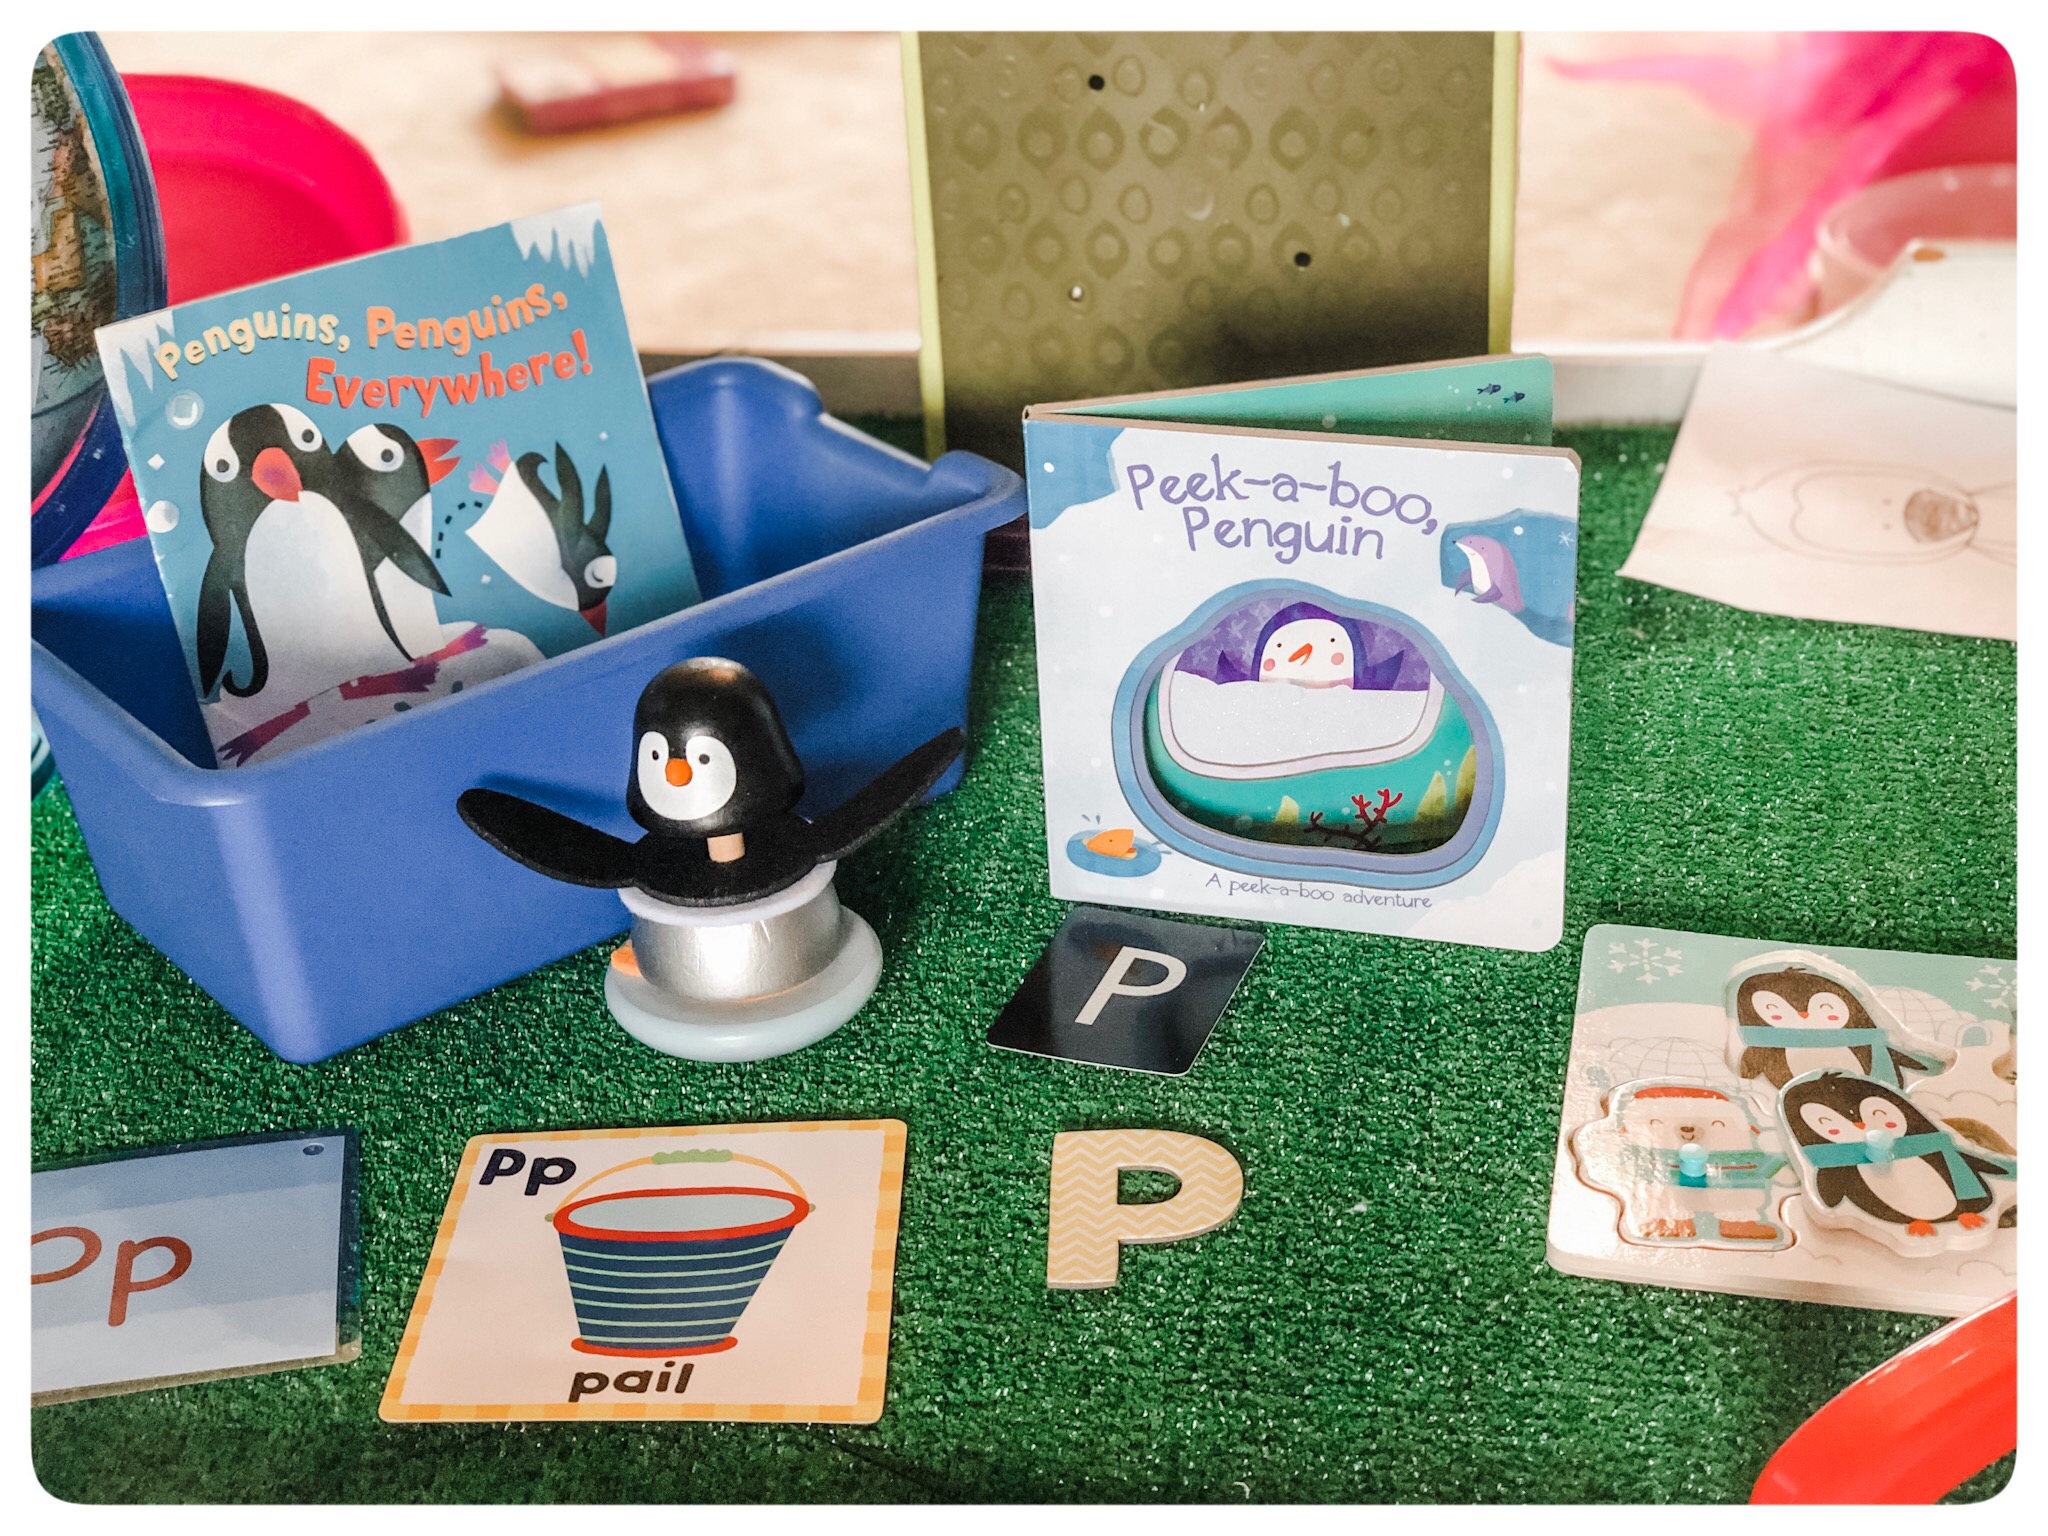 P is for Penguin.  Welcome to learning fun and creative ways to teach children letters of the alphabet, including sign language, arts and crafts, sensory bins, sensory trays, and literature.  